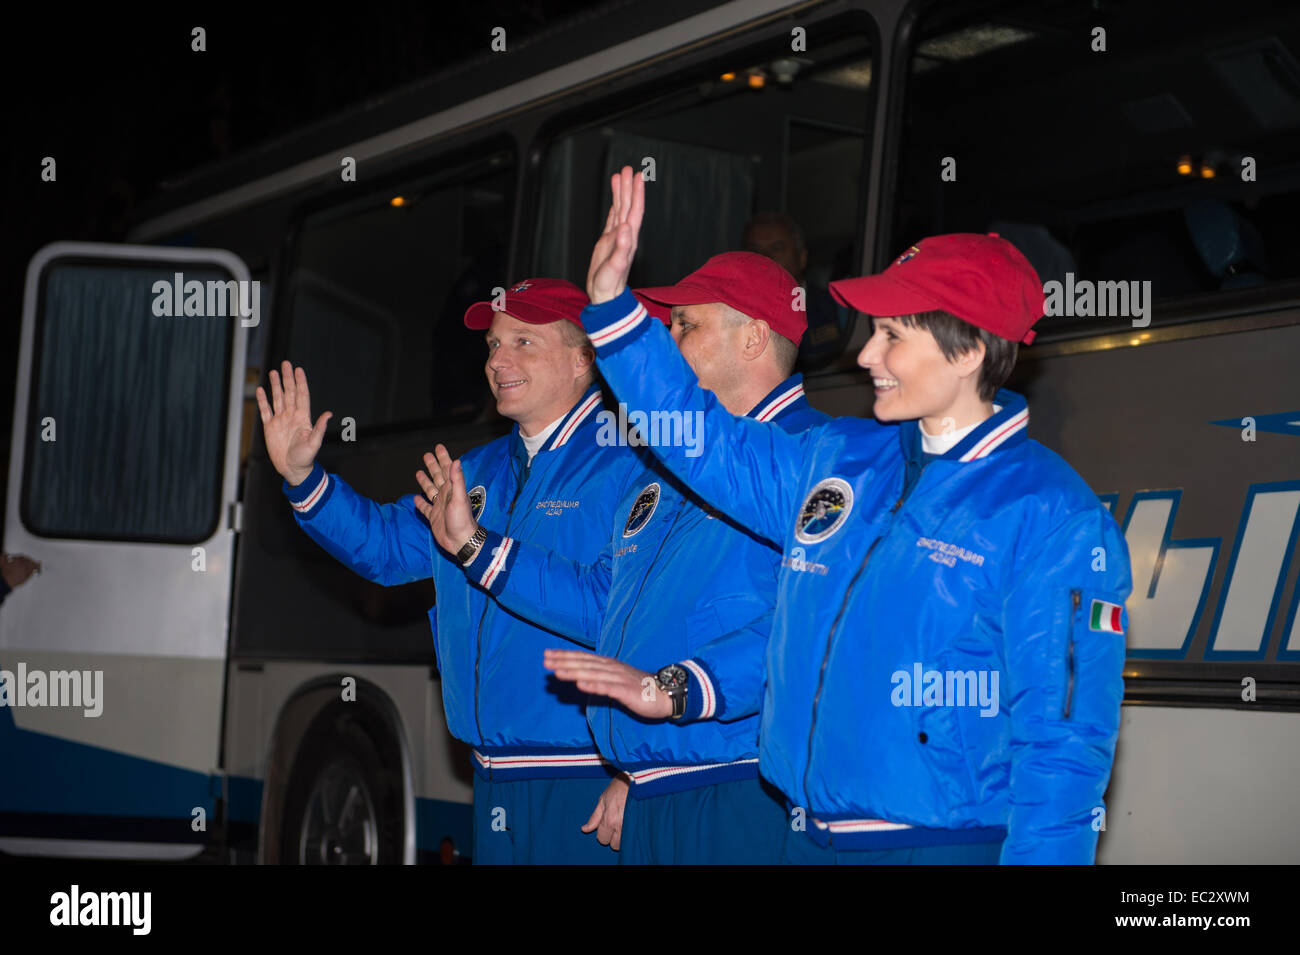 Expedition 42 crew members, Flight Engineer Terry Virts of NASA, left, Soyuz Commander Anton Shkaplerov of the Russian Federal Space Agency (Roscosmos), center,  and Flight Engineer Samantha Cristoforetti of the European Space Agency (ESA), right, wave farewell to family and friends as they depart the Cosmonaut Hotel to suit up for their Soyuz launch to the International Space Station on Sunday, Nov. 23, 2014, in Baikonur, Kazakhstan. Launch of the Soyuz rocket is scheduled for the early hours of Nov. 24 and will send Virts, Shkaplerov, and Cristoforetti on a five and a half month mission aboa Stock Photo